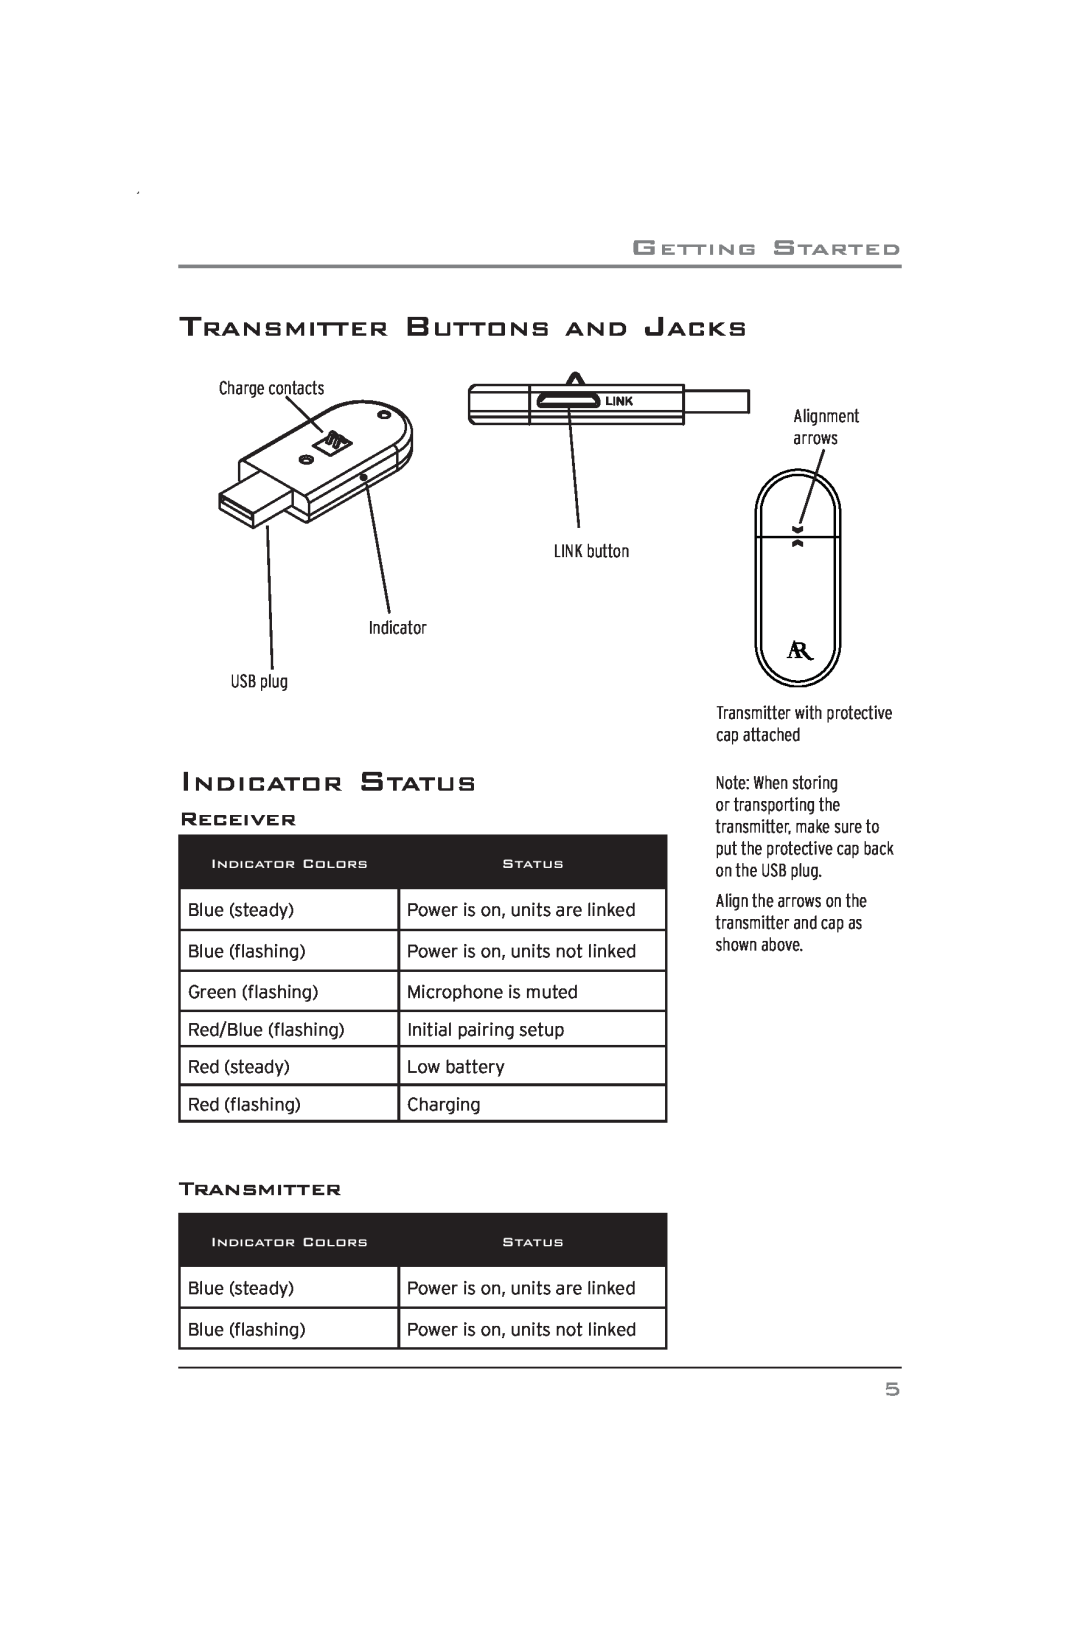 Acoustic Research ARWH2 user manual Transmitter Buttons And Jacks, INDICATOR STATUS Receiver, Getting Started 